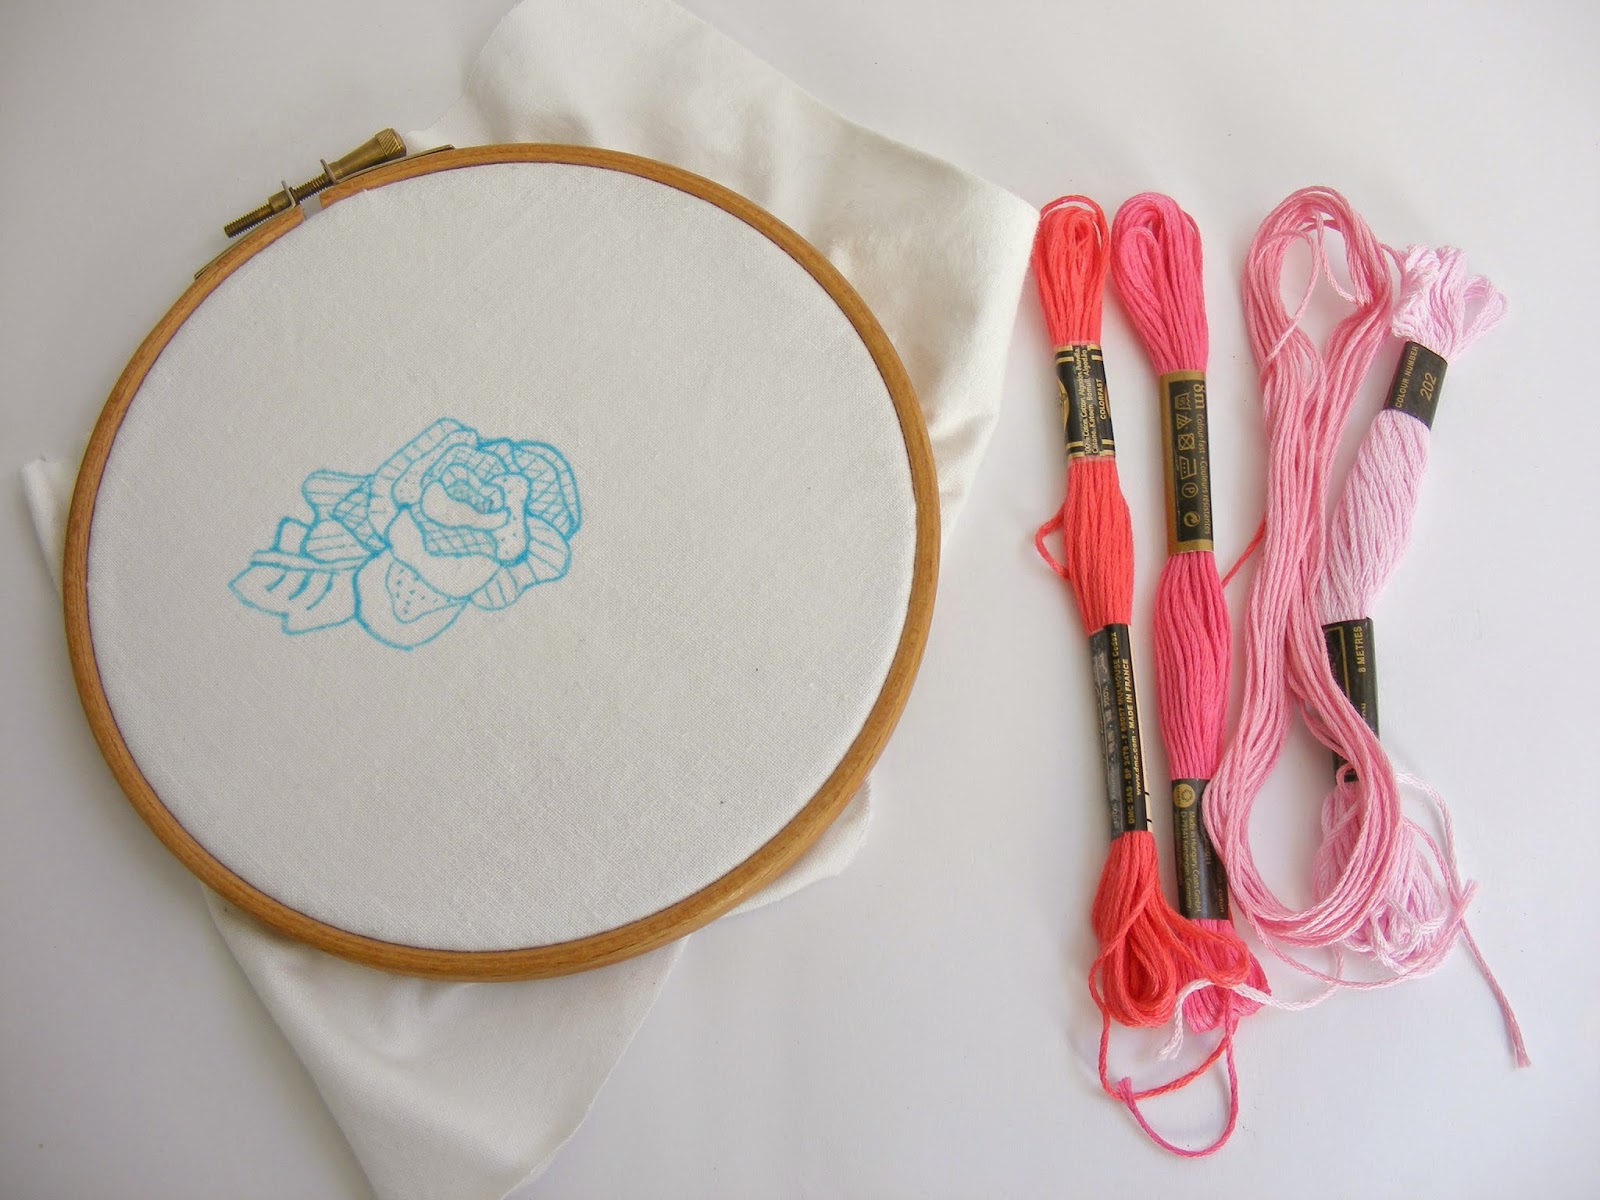 bloom and sew: Tutorial - How to Embroider a Vintage Style Rose